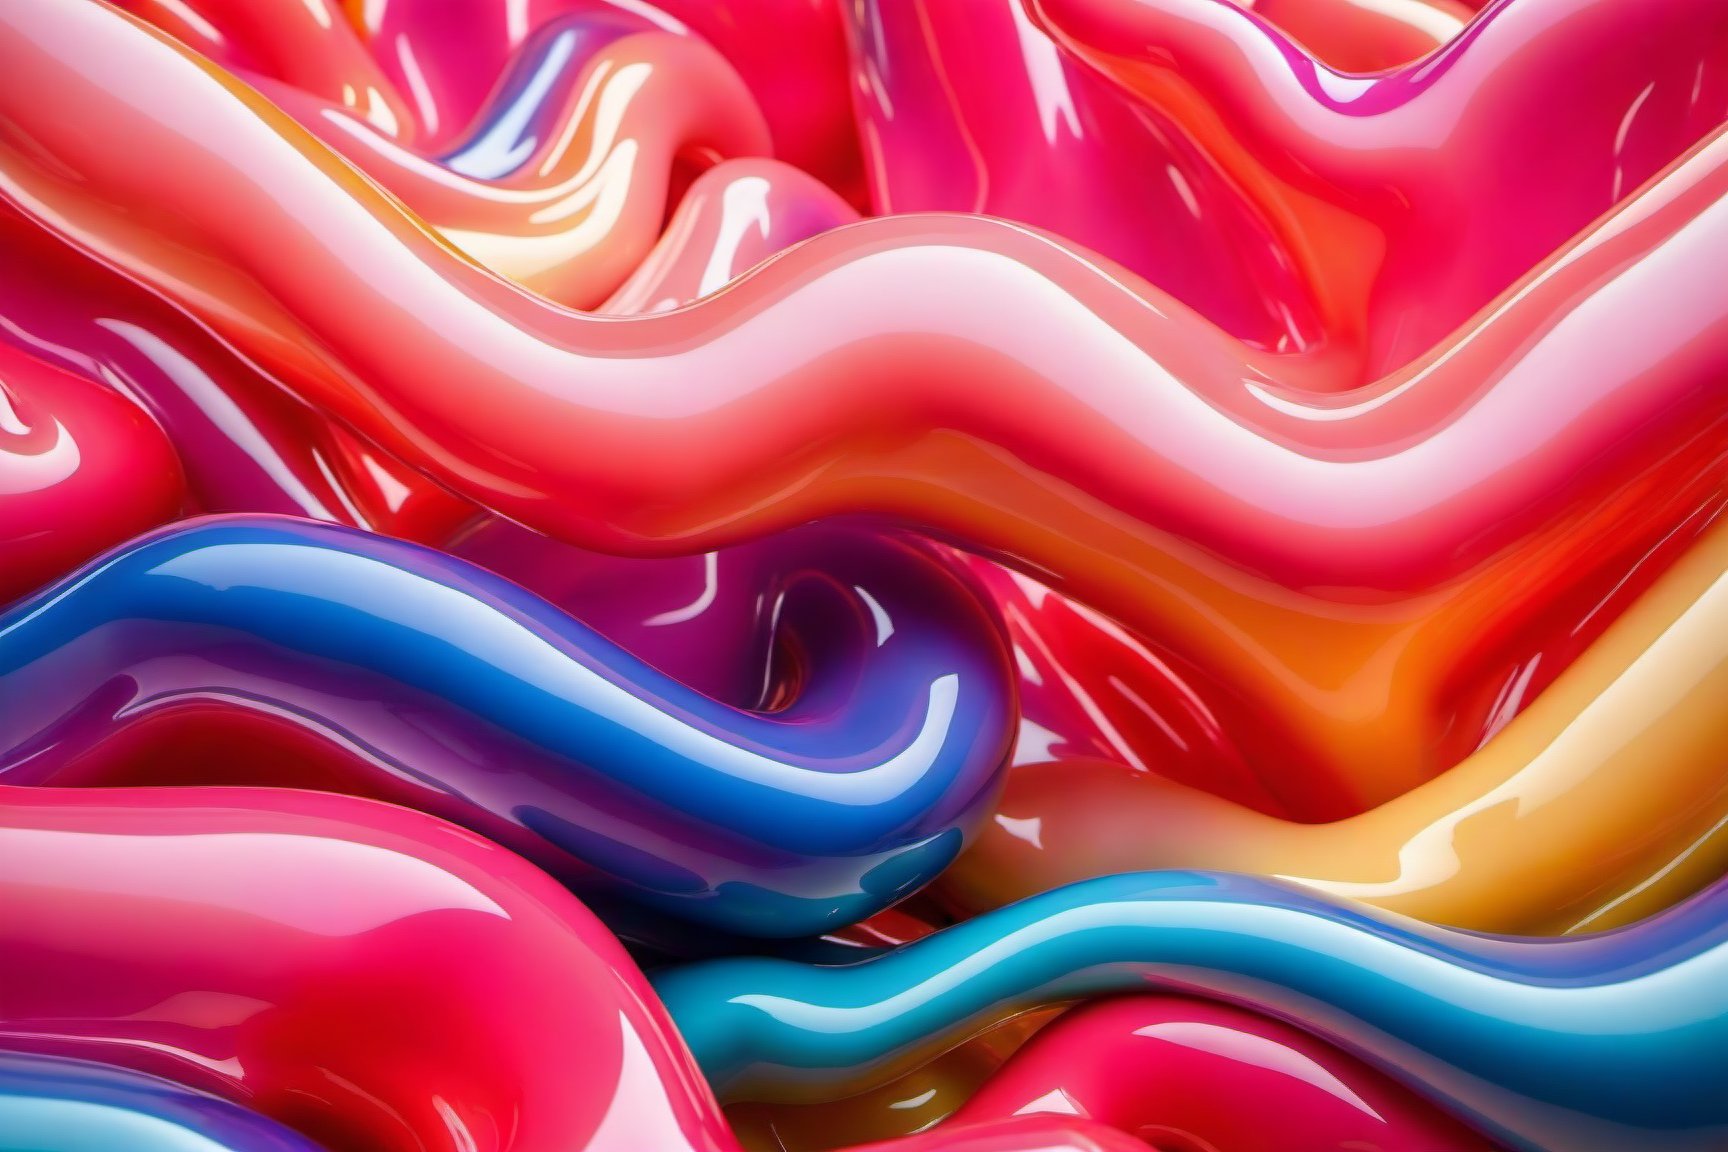 abstract, (latex:2), (pvc), flowing, ,6000,ink scenery, (transparent), translucent, curvy shapes, kinky abstract,  pastel, vibrant